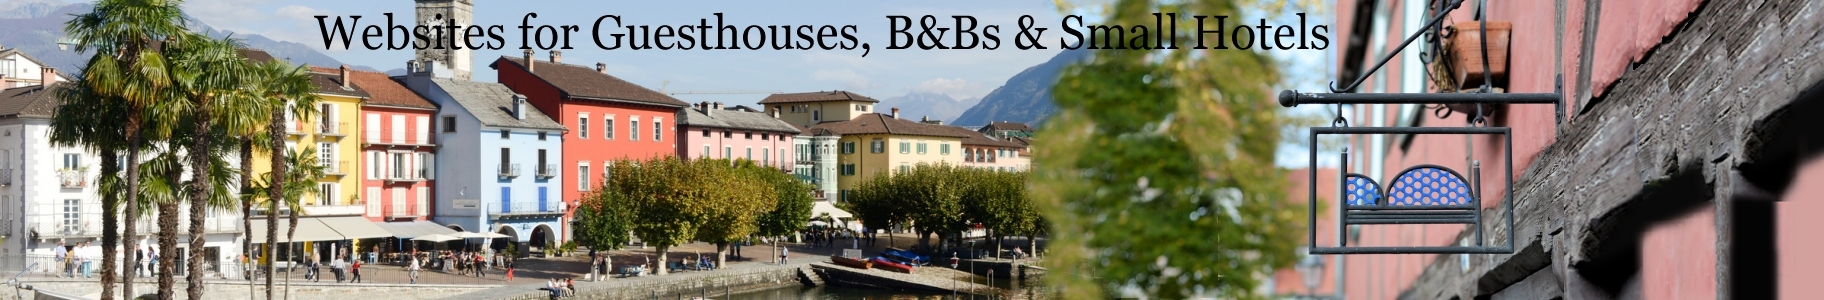 Websites with Booking System  for Guesthouses, Inns, B & Bs & Small Hotels